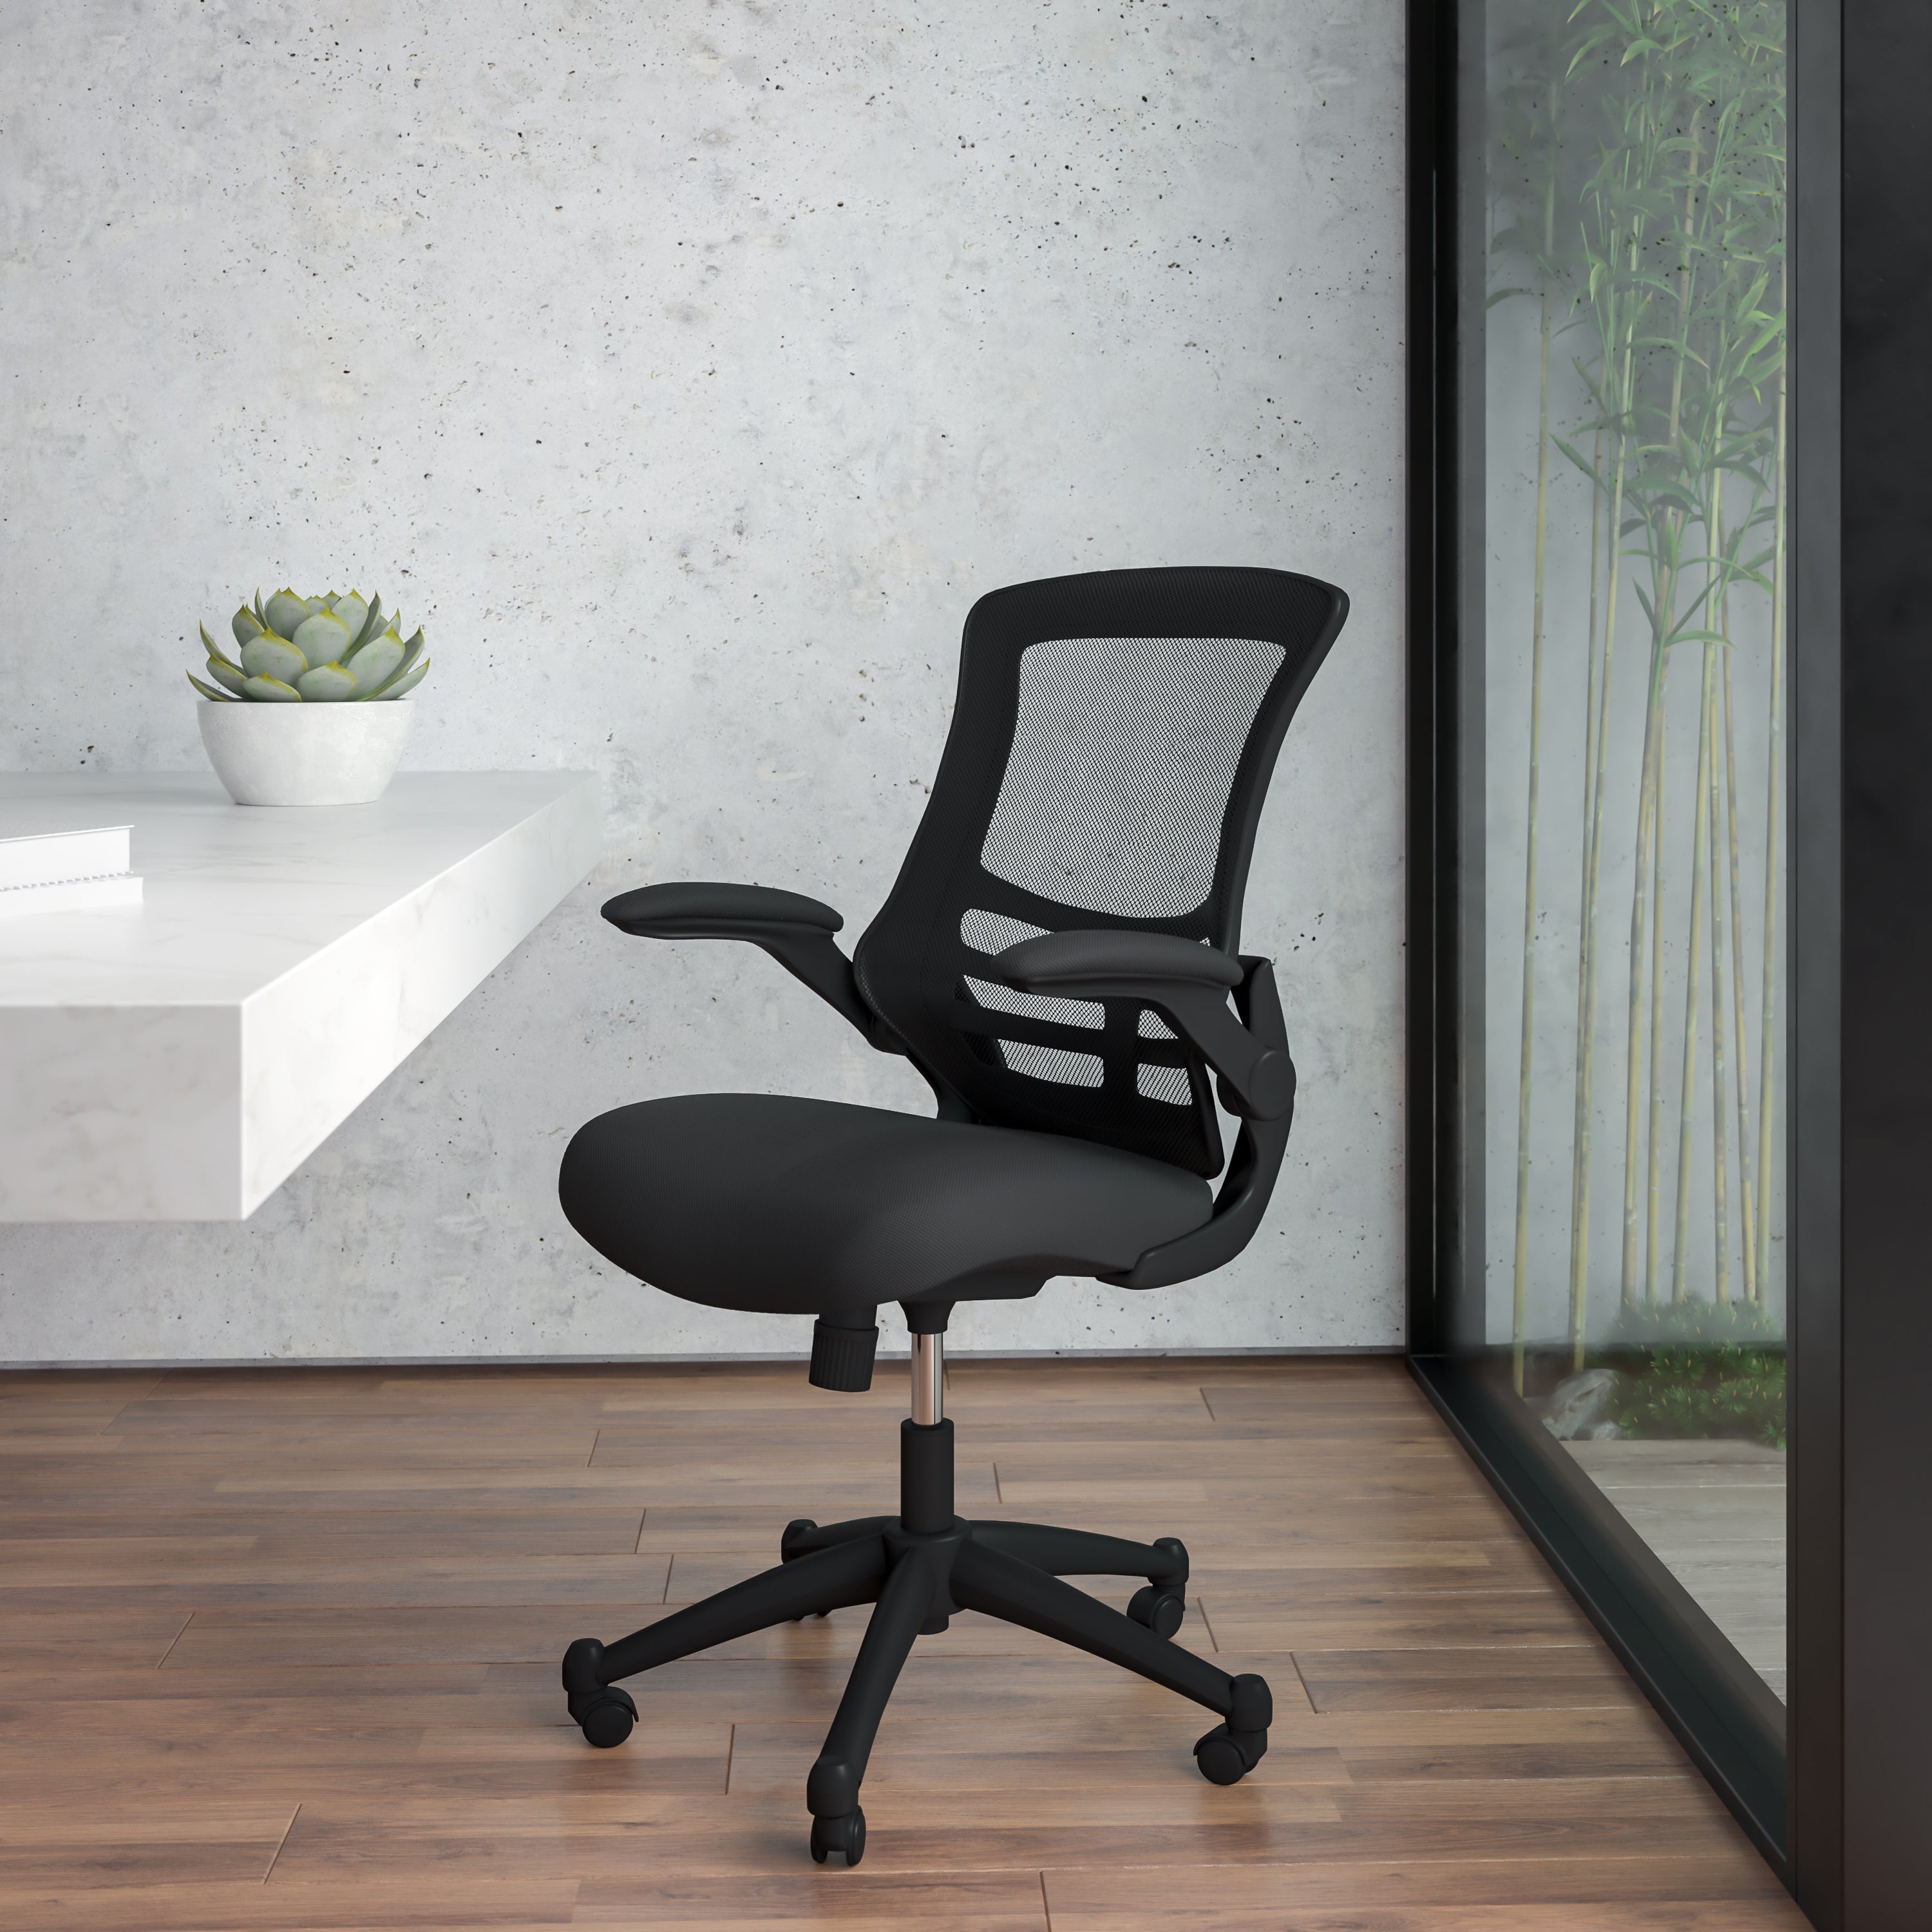 Mid-Back Mesh Swivel Ergonomic Task Office Chair with Flip-Up Arms-Office Chair-Flash Furniture-Wall2Wall Furnishings